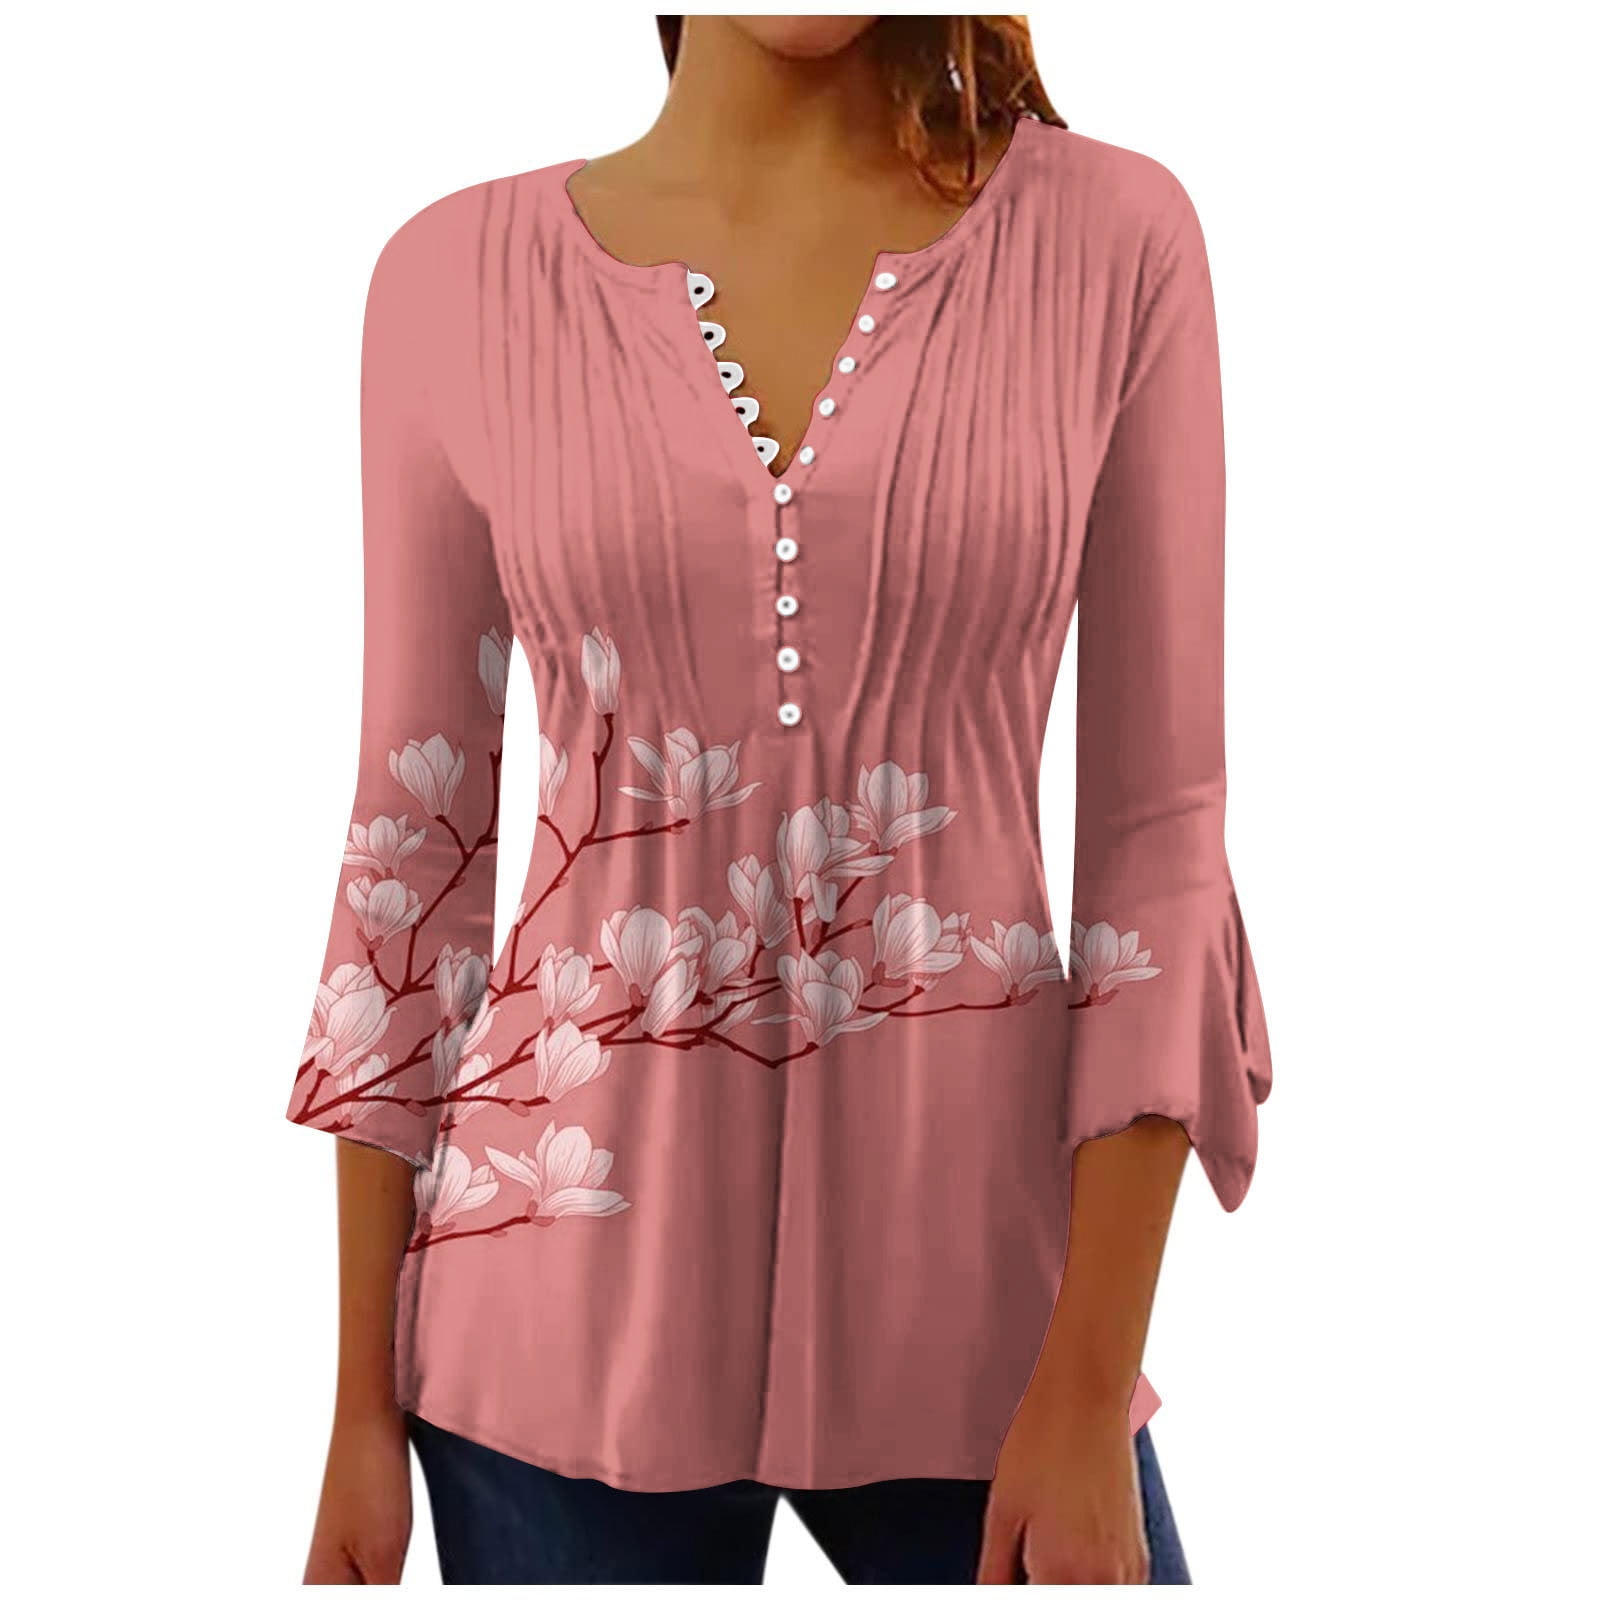 VSSSJ Blouses for Women Crew Pink Up Daily Ruched Comfy Tunic Shirts 3/4 L Button Tops Printed Sleeve Floral Trumpet Pullover Neck Casual